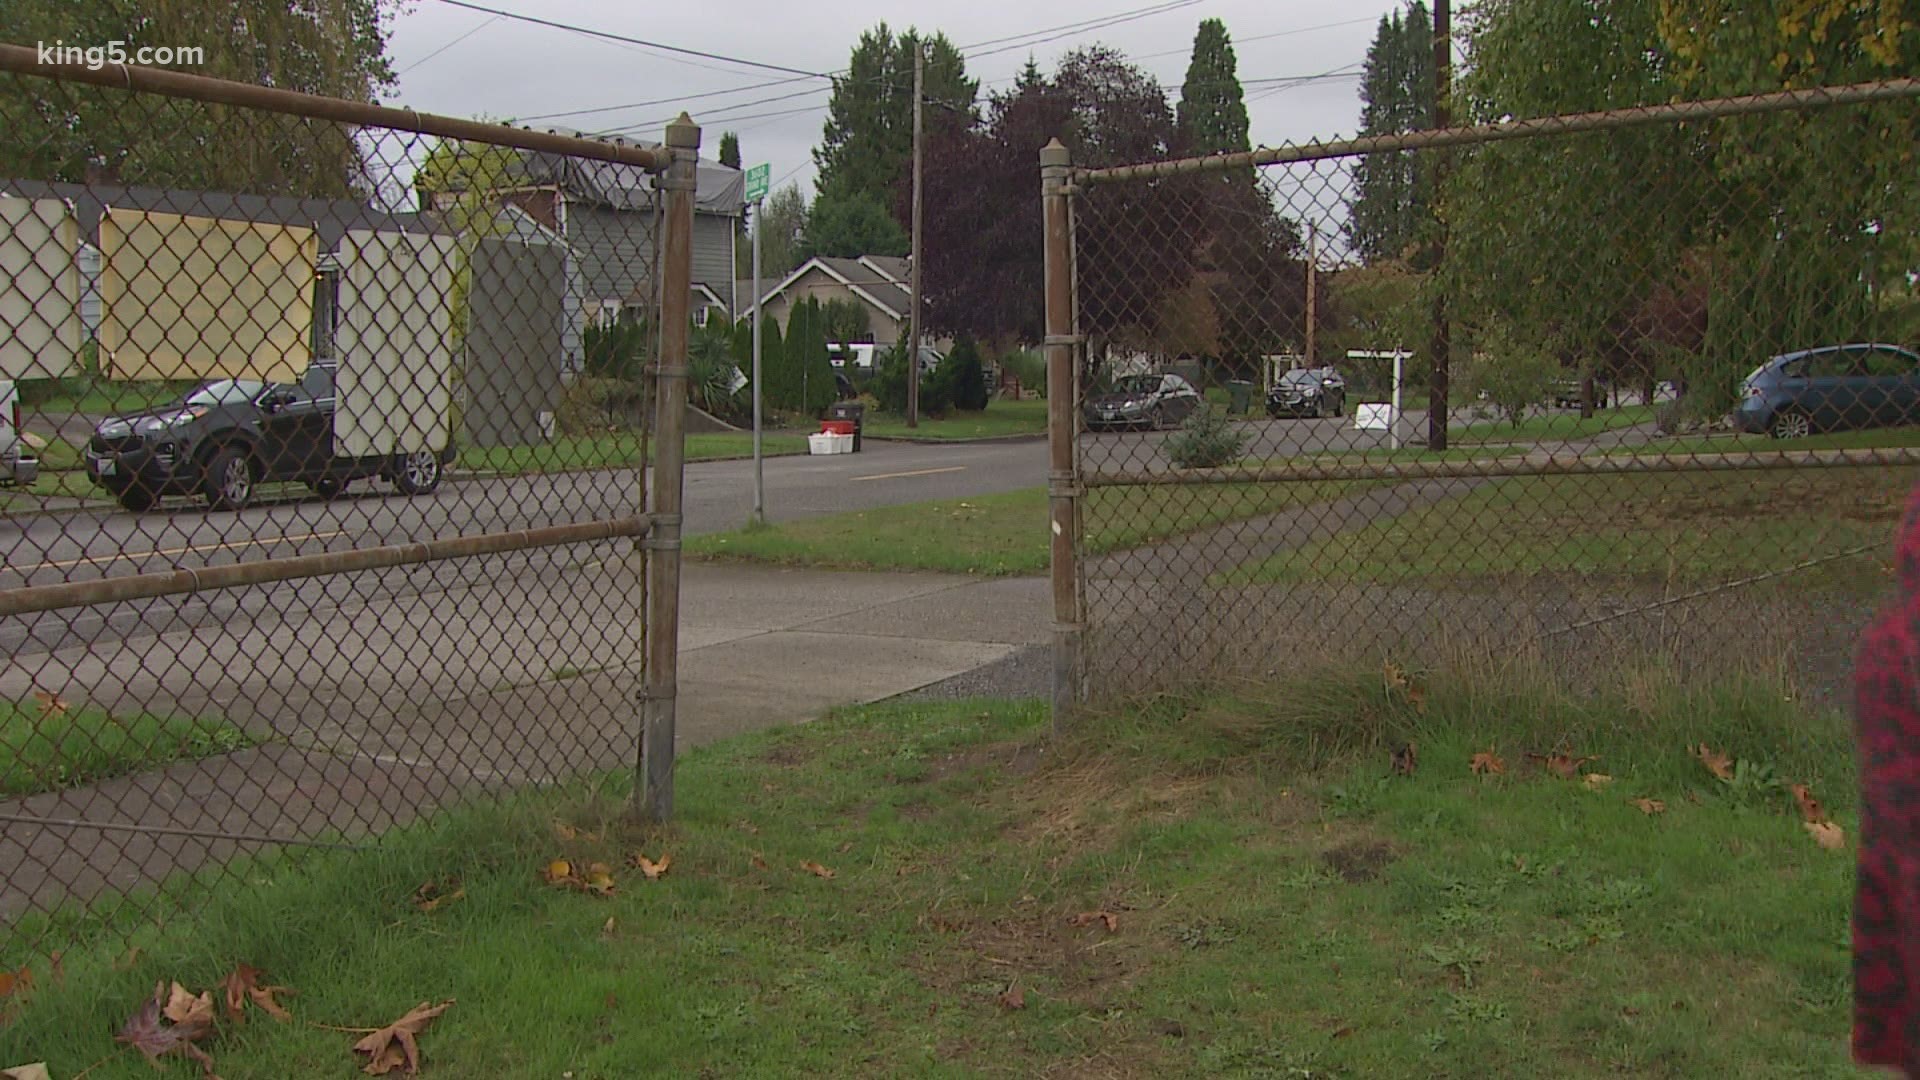 Everett City Council is set to vote on whether an affordable housing project in the city's Port Gardener neighborhood can move forward.